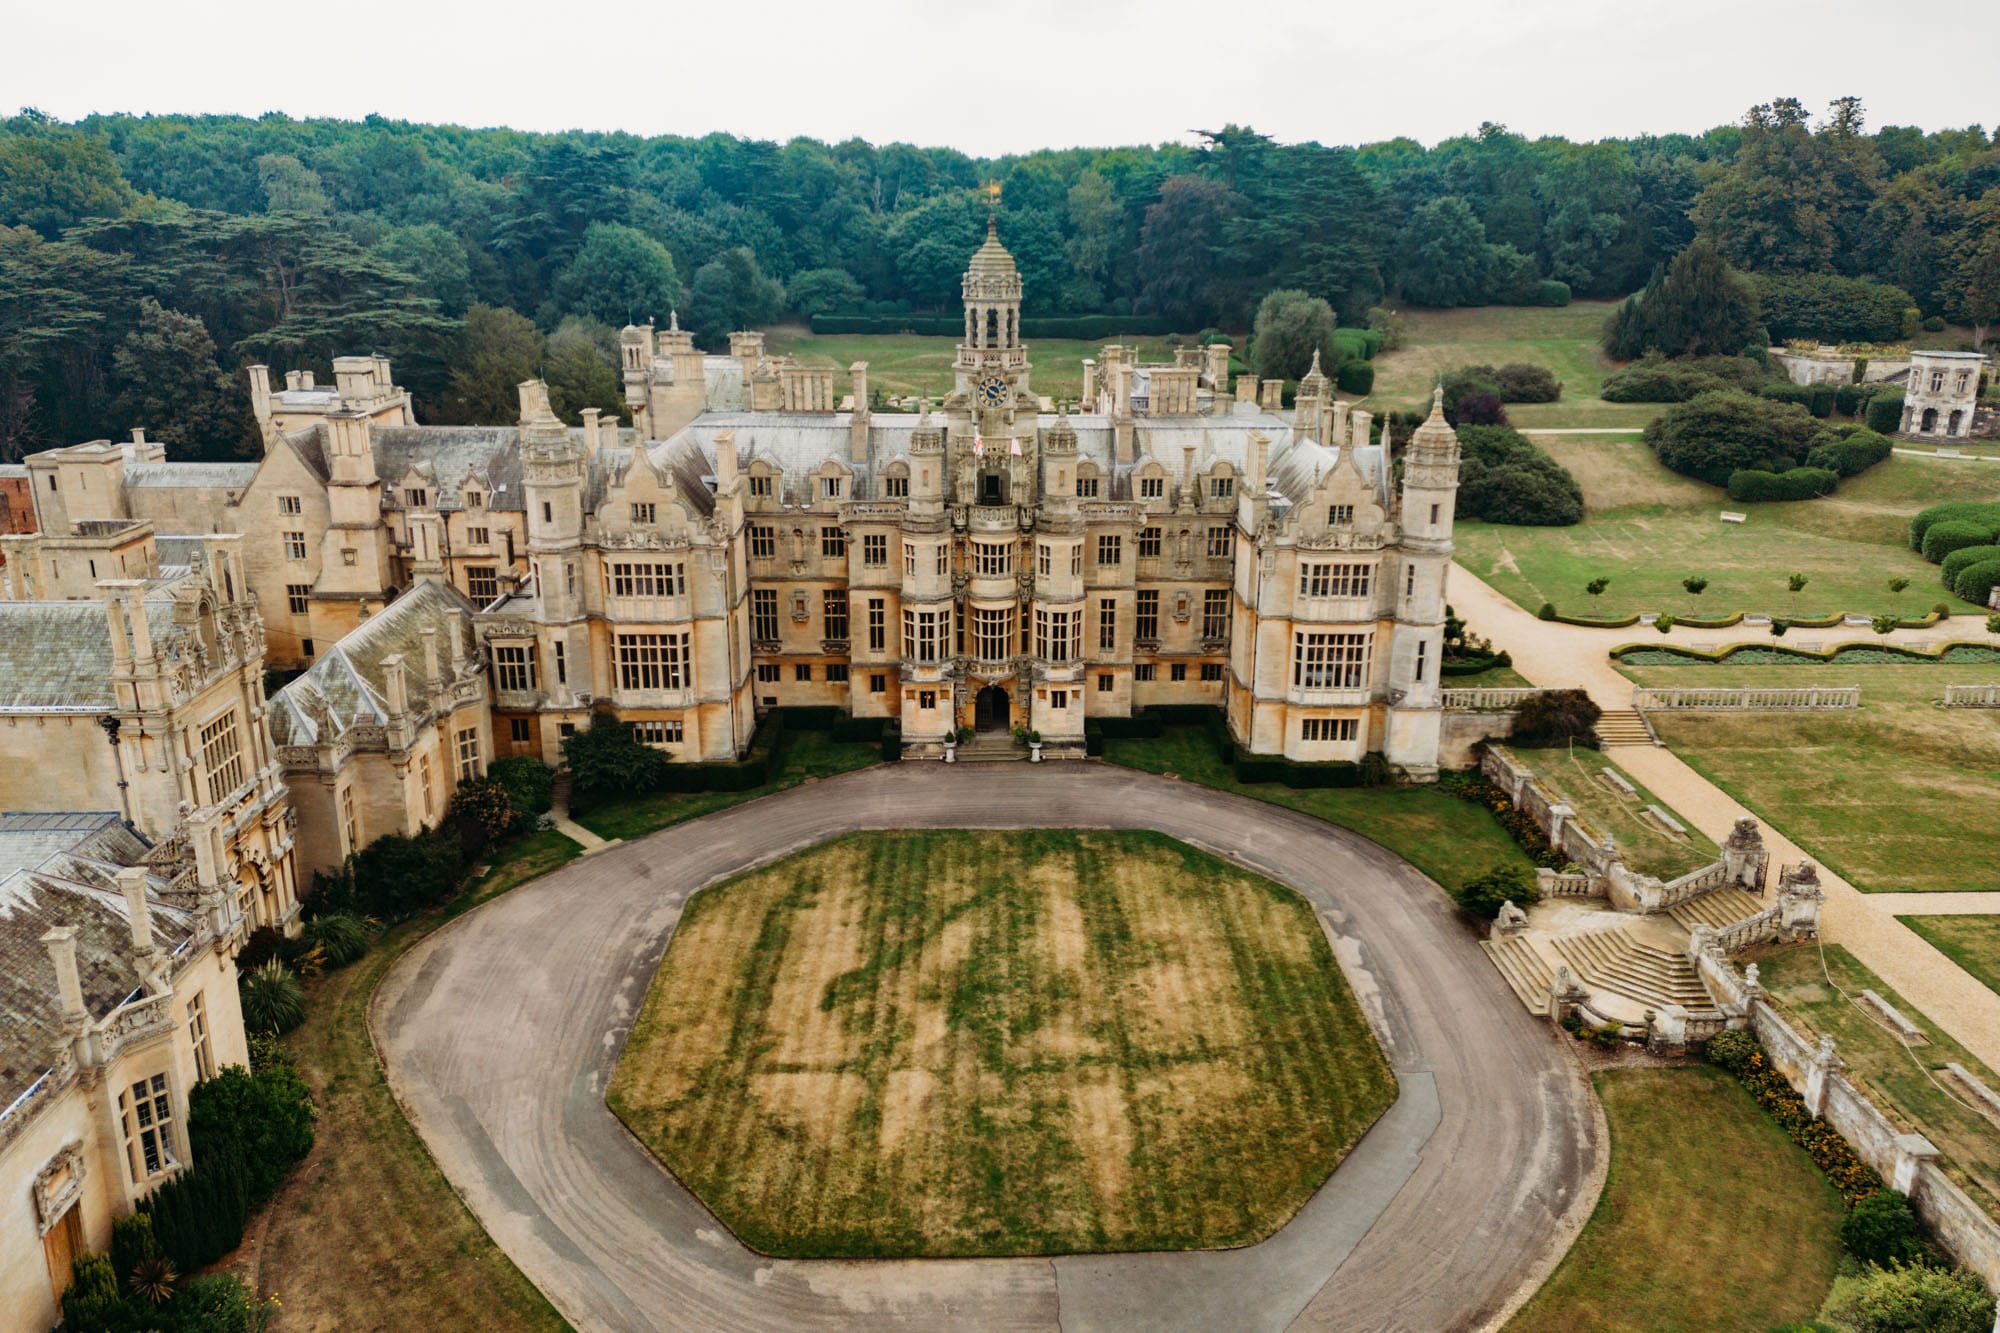 Aerial view of Harlaxton Manor from drone